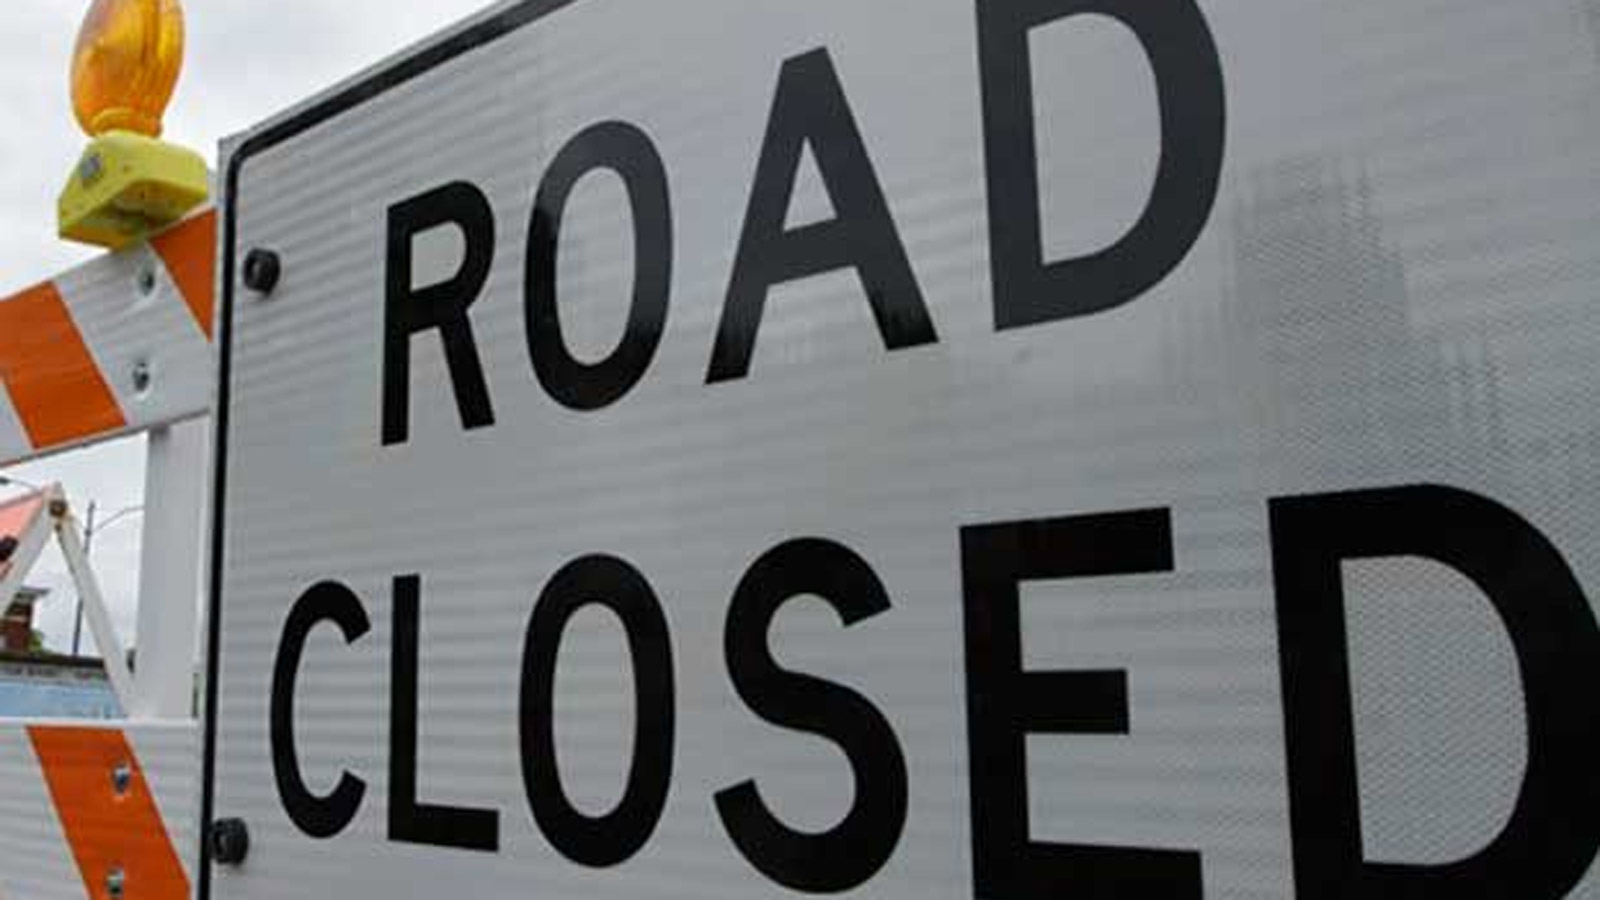 File photo of a road closed sign....